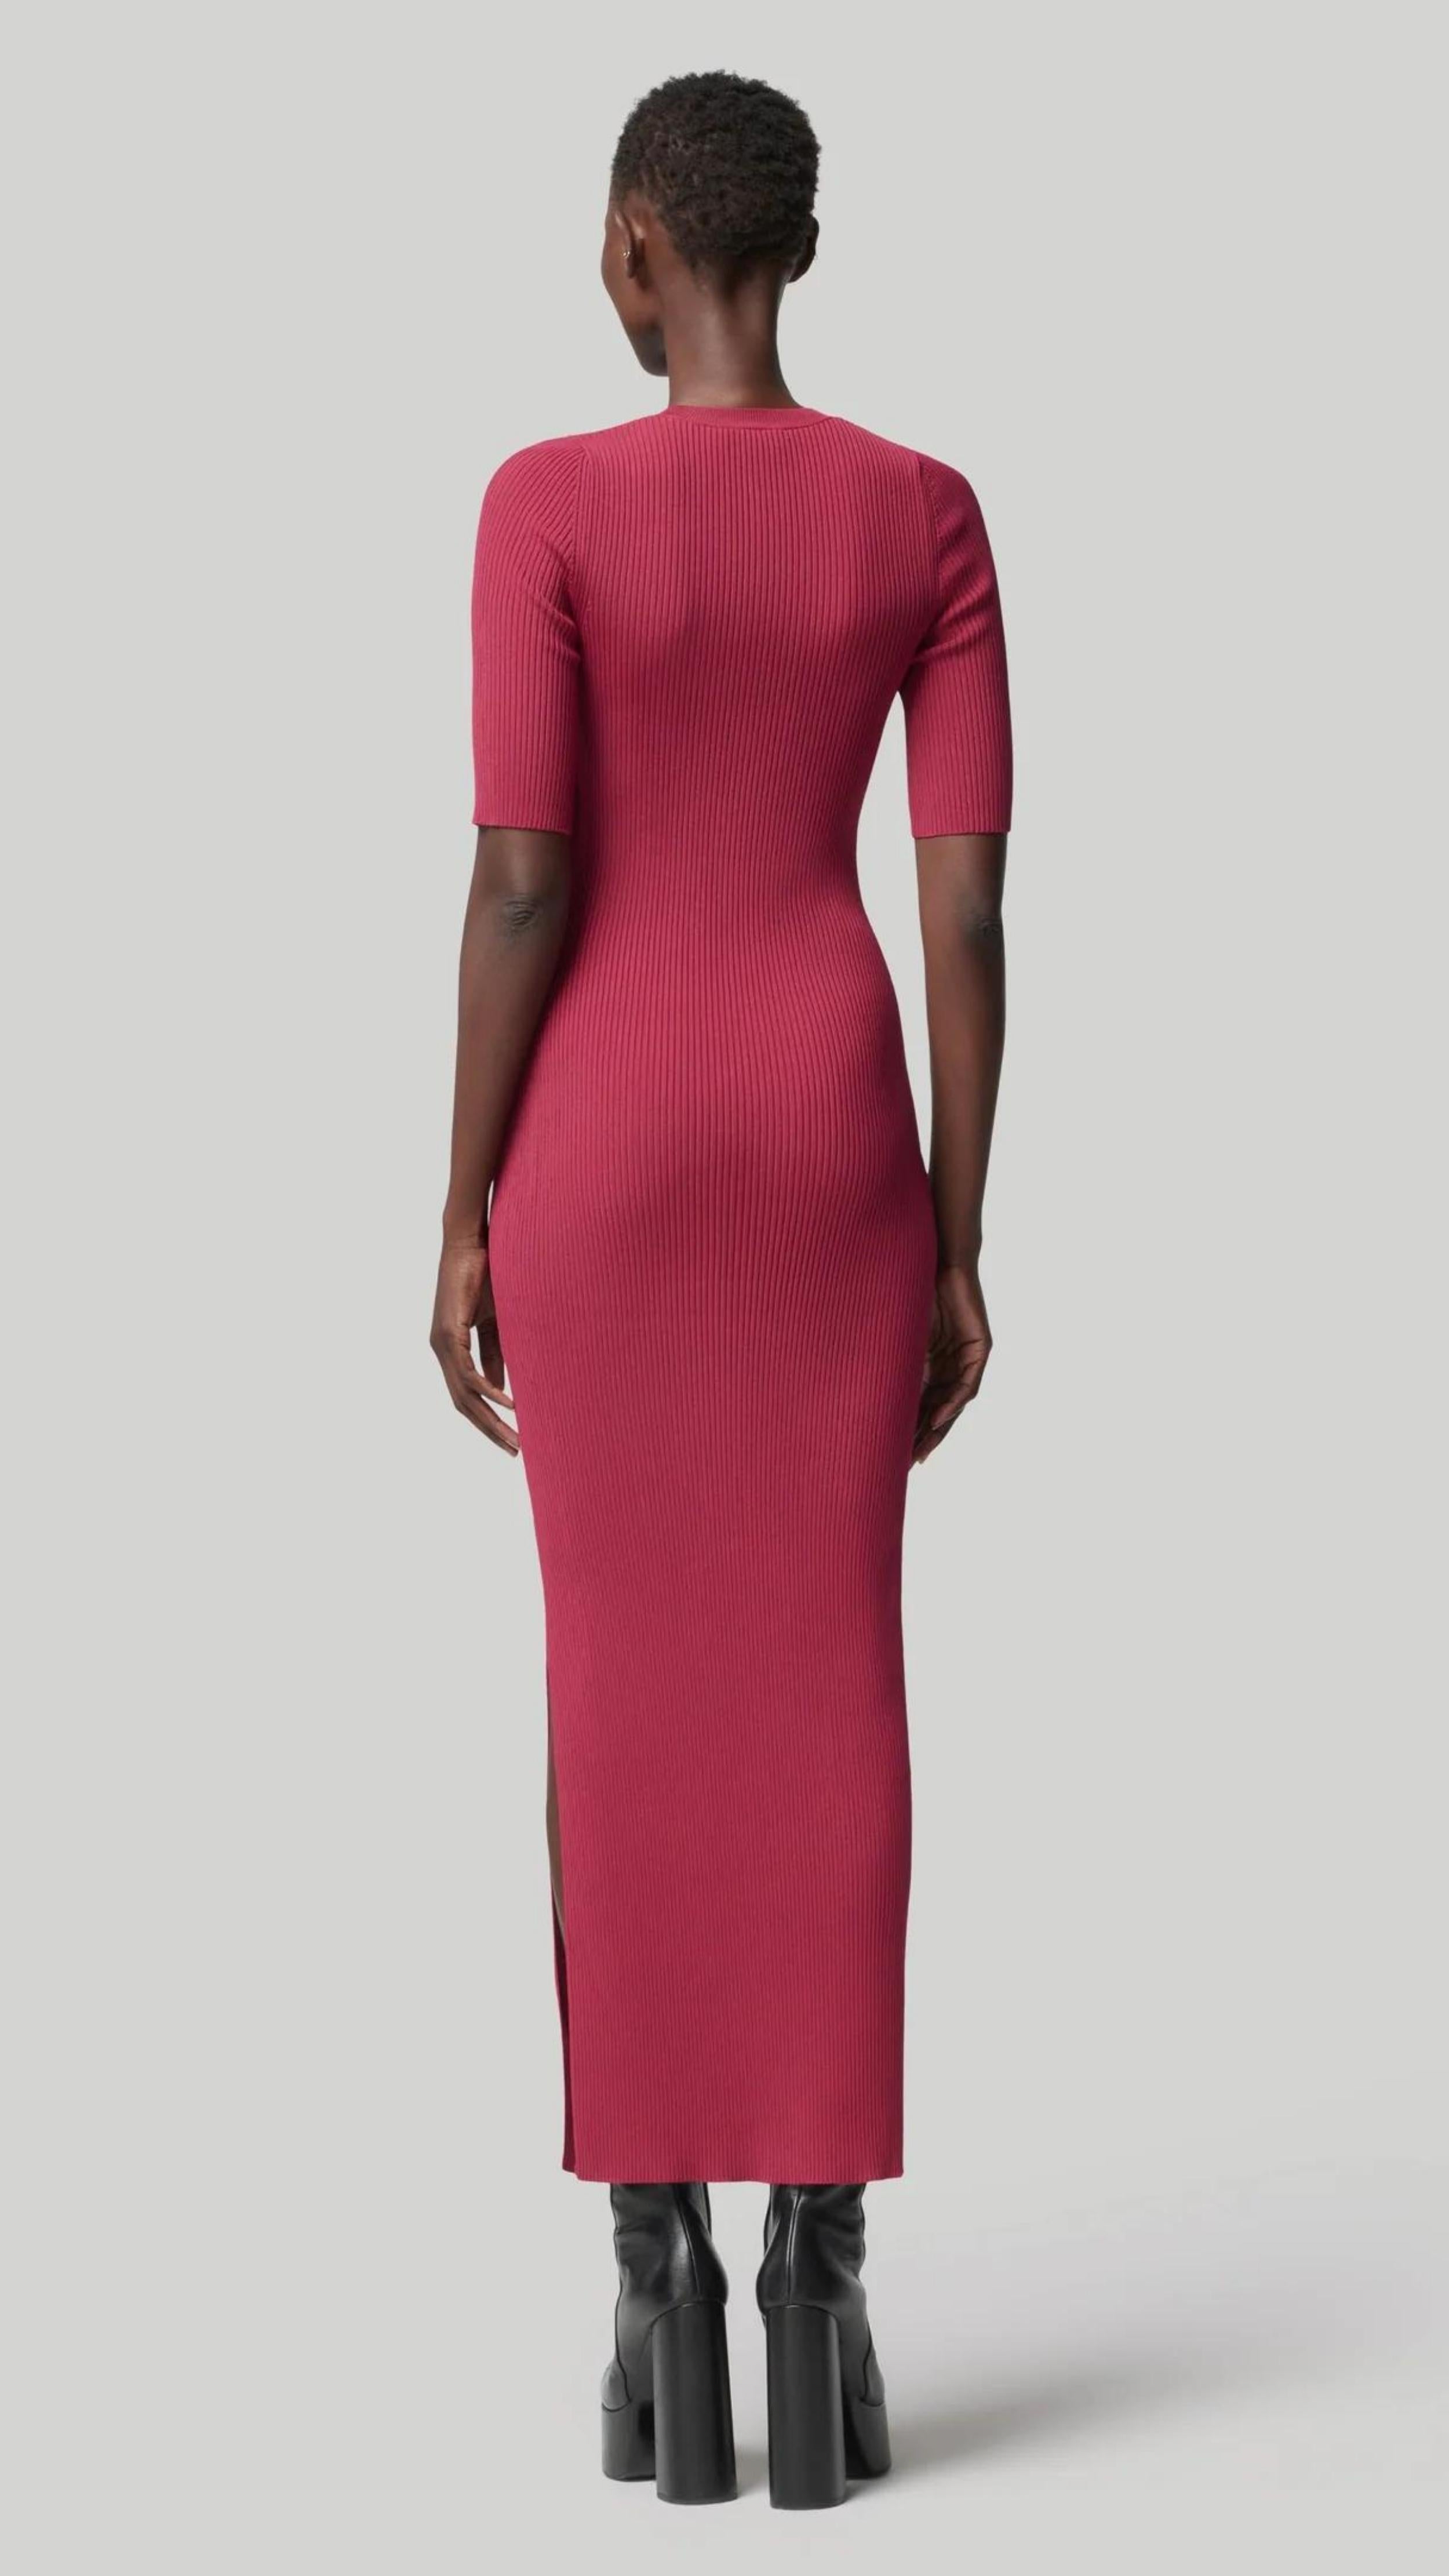 Altruzarra, Argolis Dress. Rose pink colored ribbed knit dress. Body hugging with flattering, slimming from waist detail. It has a rounded collar, half short sleeves and midid length. There are two side slits to the knee. Shown on model facing back. Available at experience 27 in madrid spain.